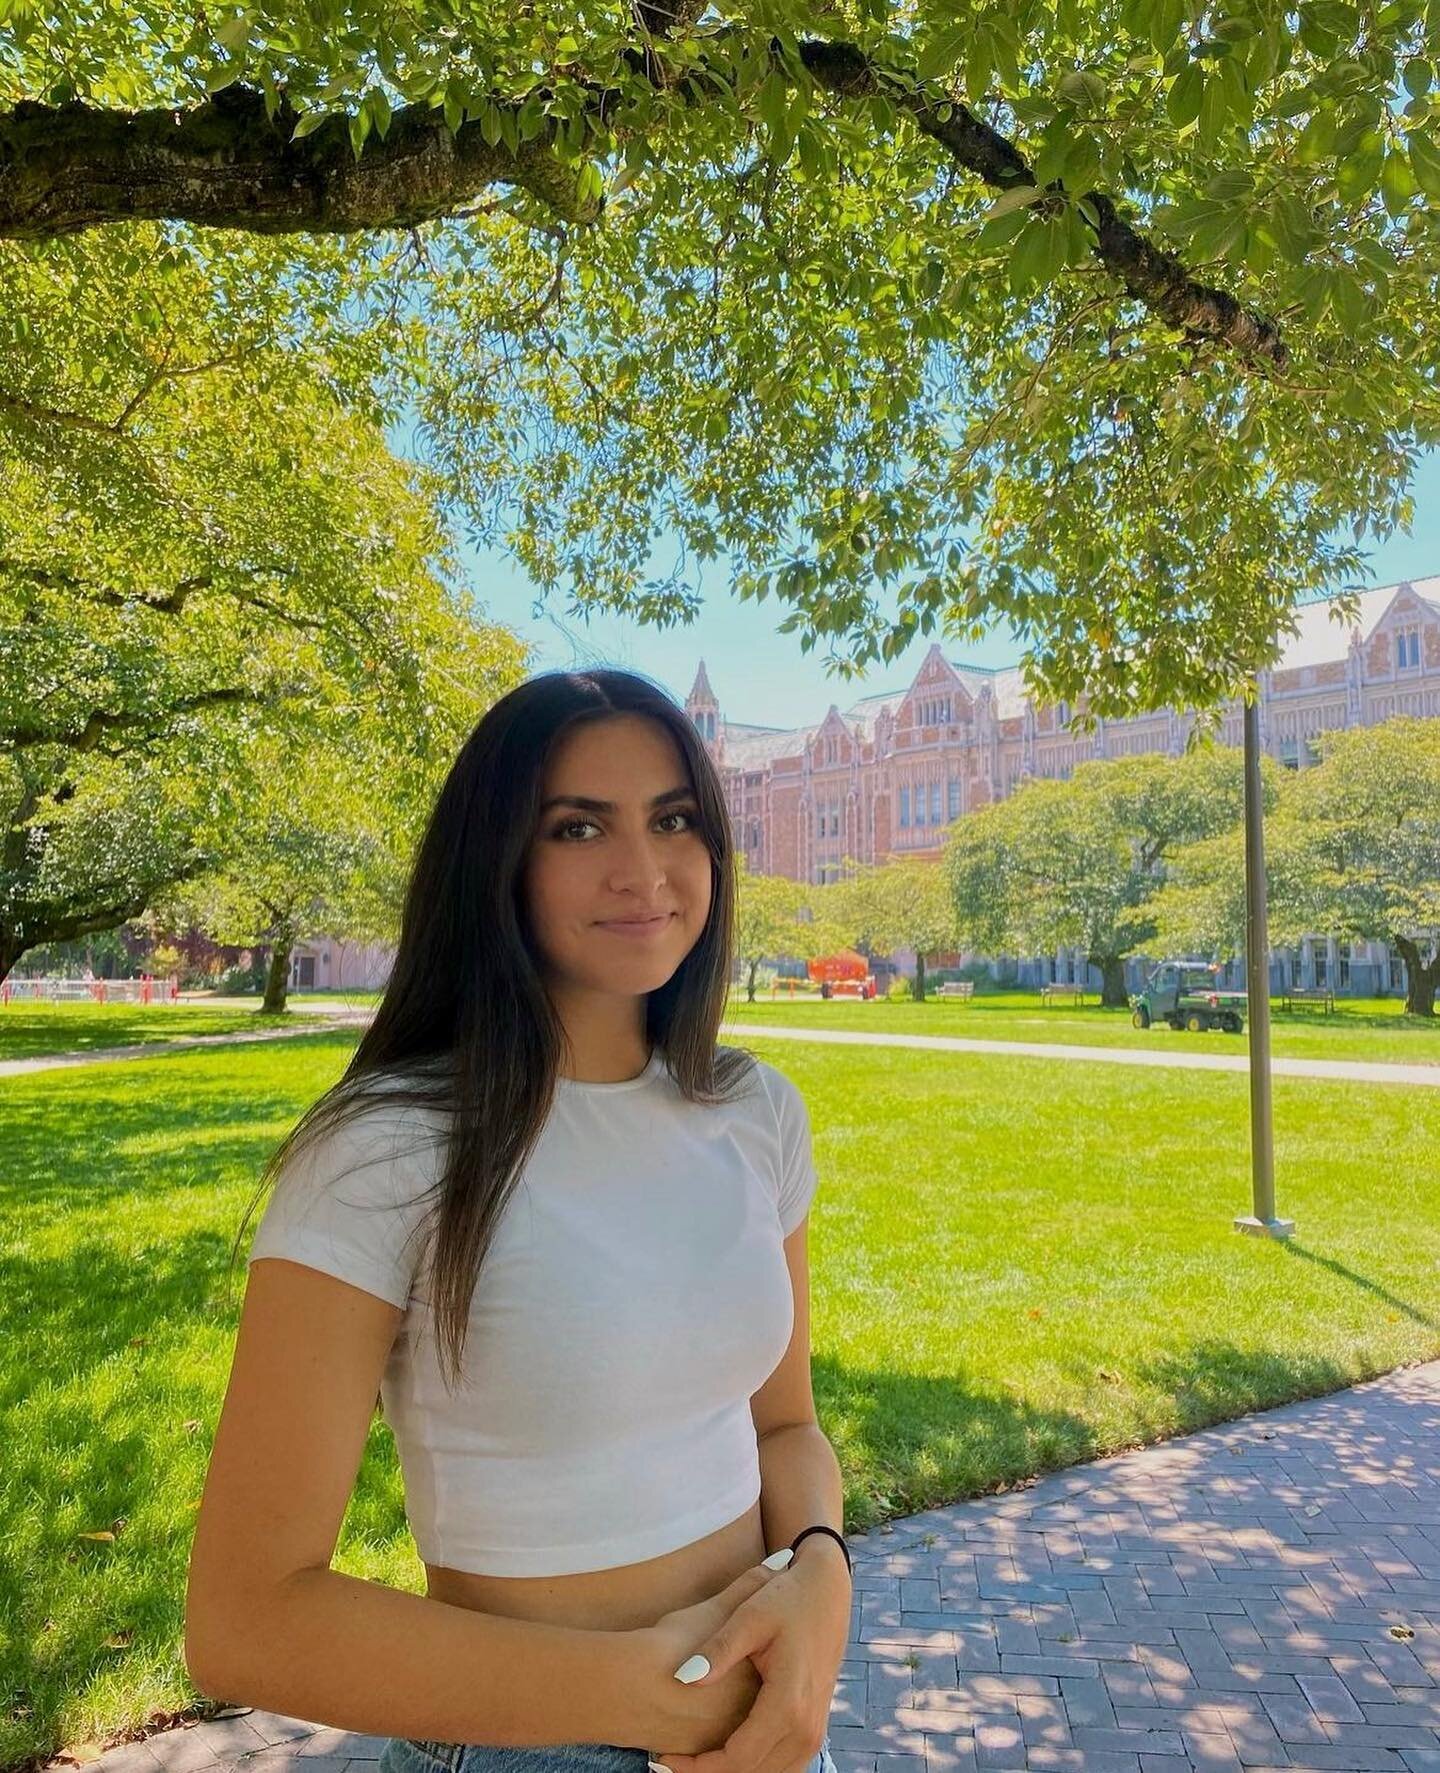 #NewMemberMonday 🦉 @vanessa_west11 

MC 23, Vanessa, is from Leavenworth, WA! She is planning on majoring in nursing. She enjoys music, playing volleyball, and exploring the mountains. She says, &ldquo;Chi Omega was so welcoming from the start. I&rs